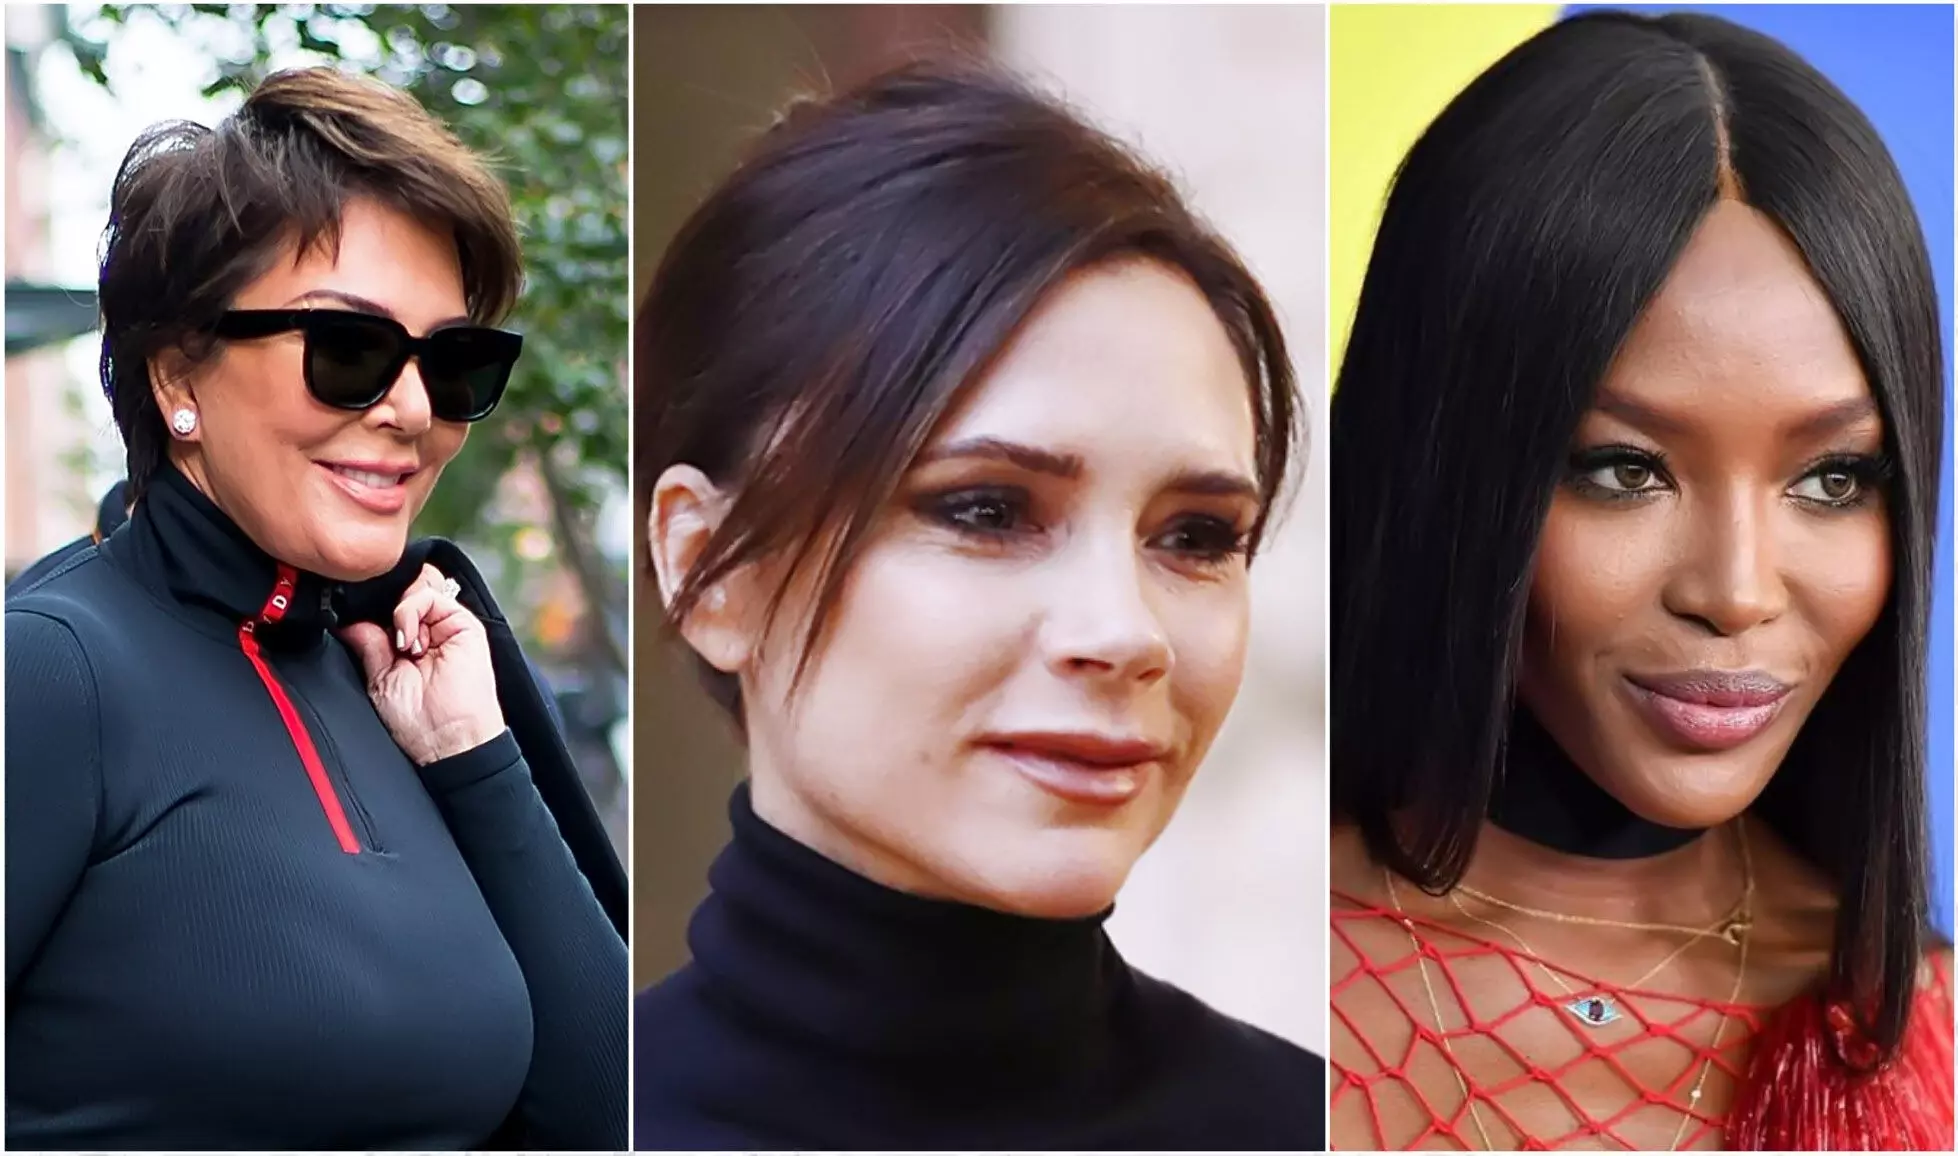 Karl Lagerfeld: Kris Jenner, Victoria Beckham, Naomi Campbell, other supermodels pay tribute